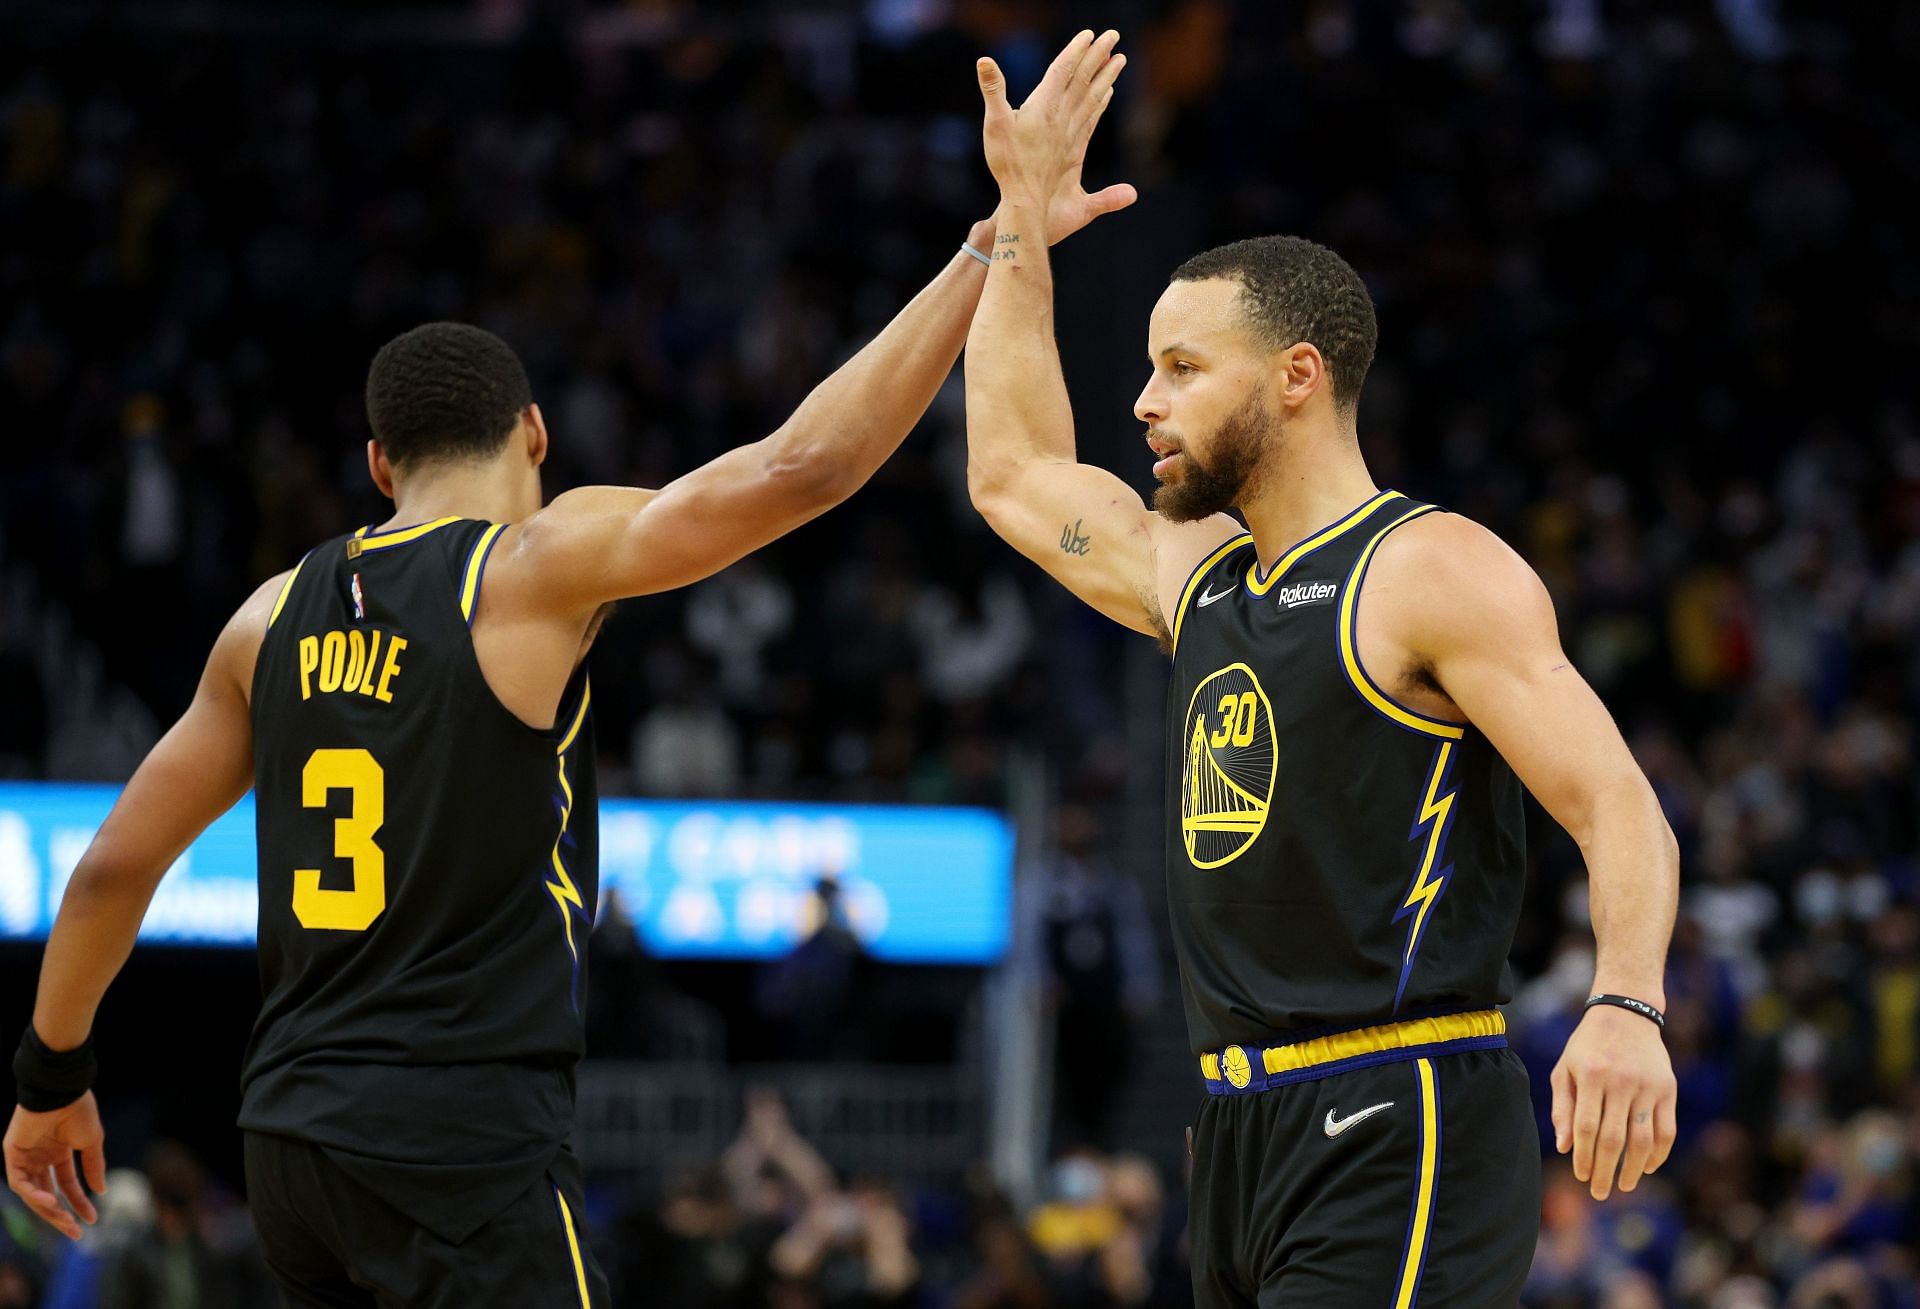 Steph Curry and Jordan Poole of the Golden State Warriors